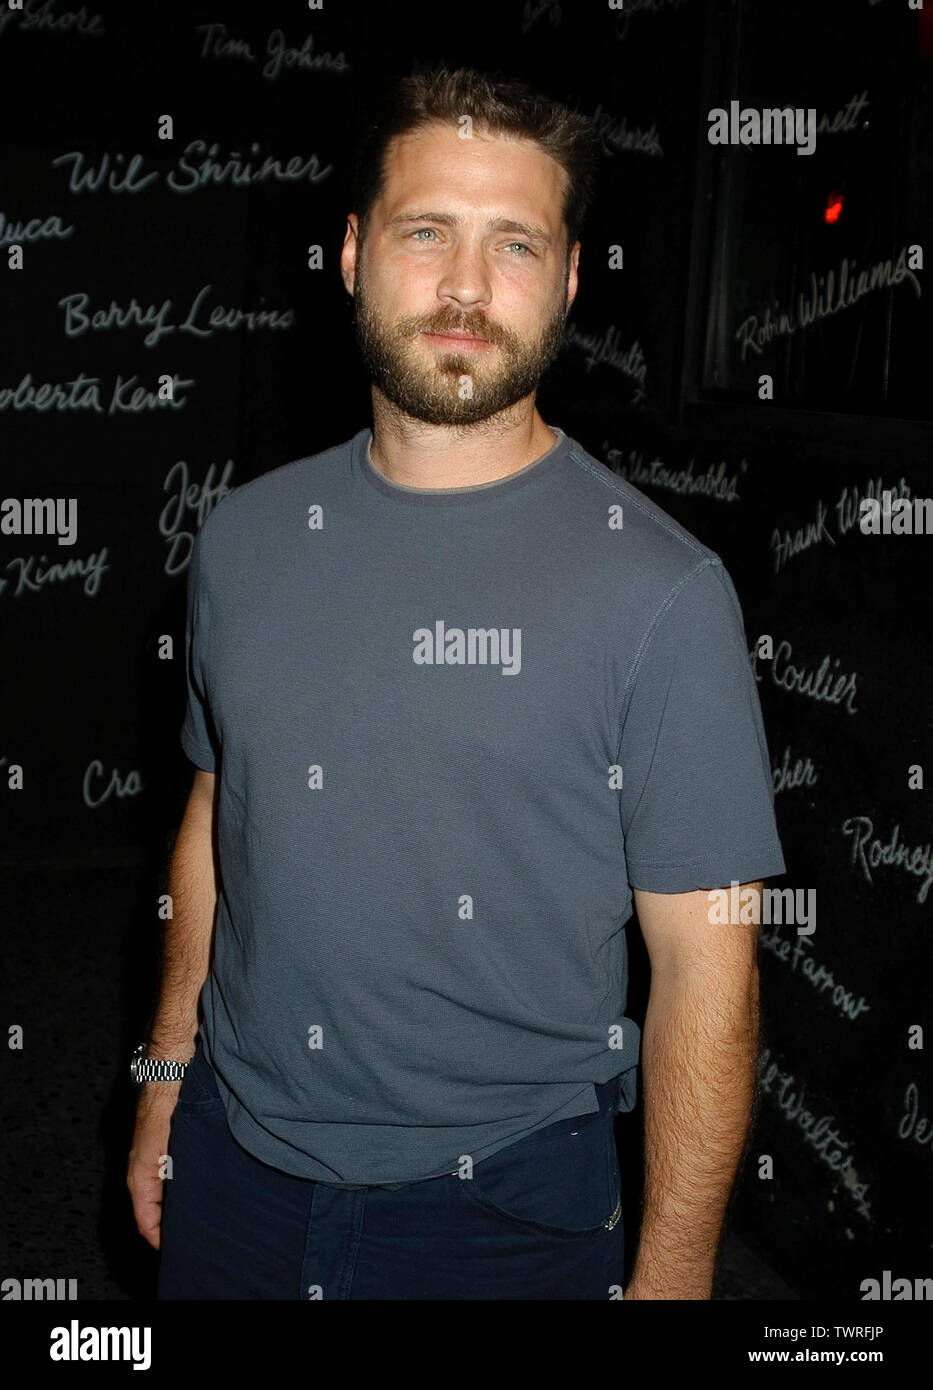 Jason Priestly at The Smothers Brothers performance benefiting Children of the Night at the Comedy Store in West Hollywood, CA. The event took place on Thursday, July 31, 2003.  Photo credit: SBM / PictureLux File Reference # 33790-2833SMBPLX  For Editorial Use Only -  All Rights Reserved Stock Photo